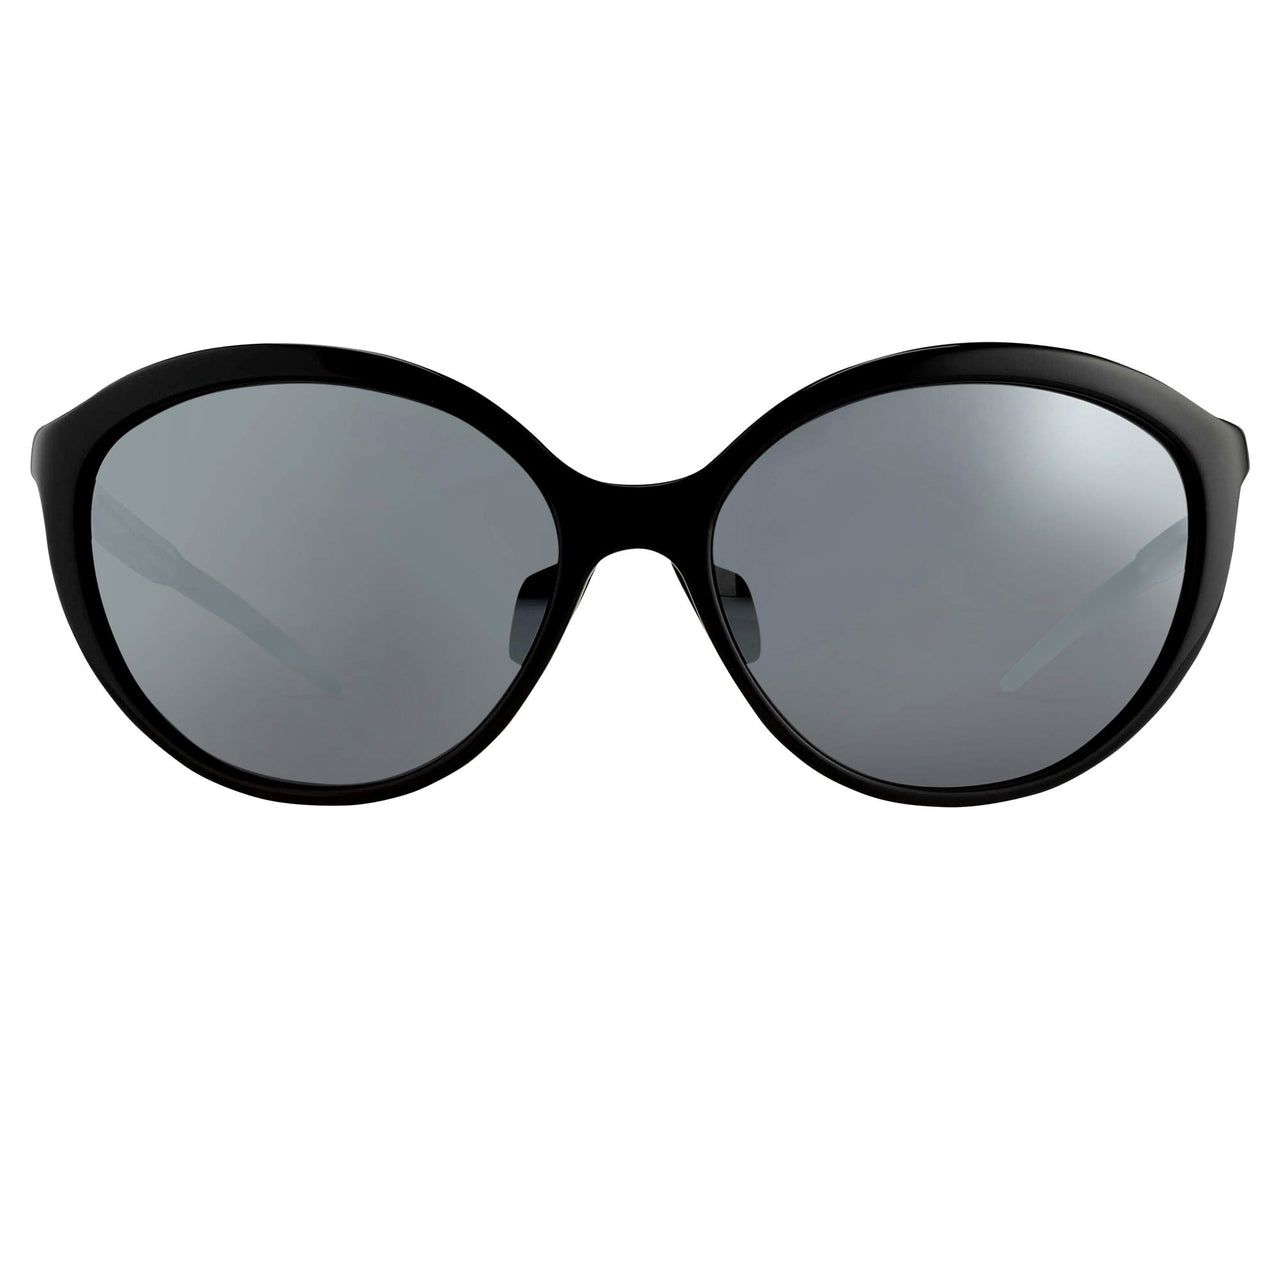 Prabal Gurung Sunglasses Female Oversized Black and Black/Teal Category 3 Silver Mirror Lenses PG22C5SUN - Watches & Crystals